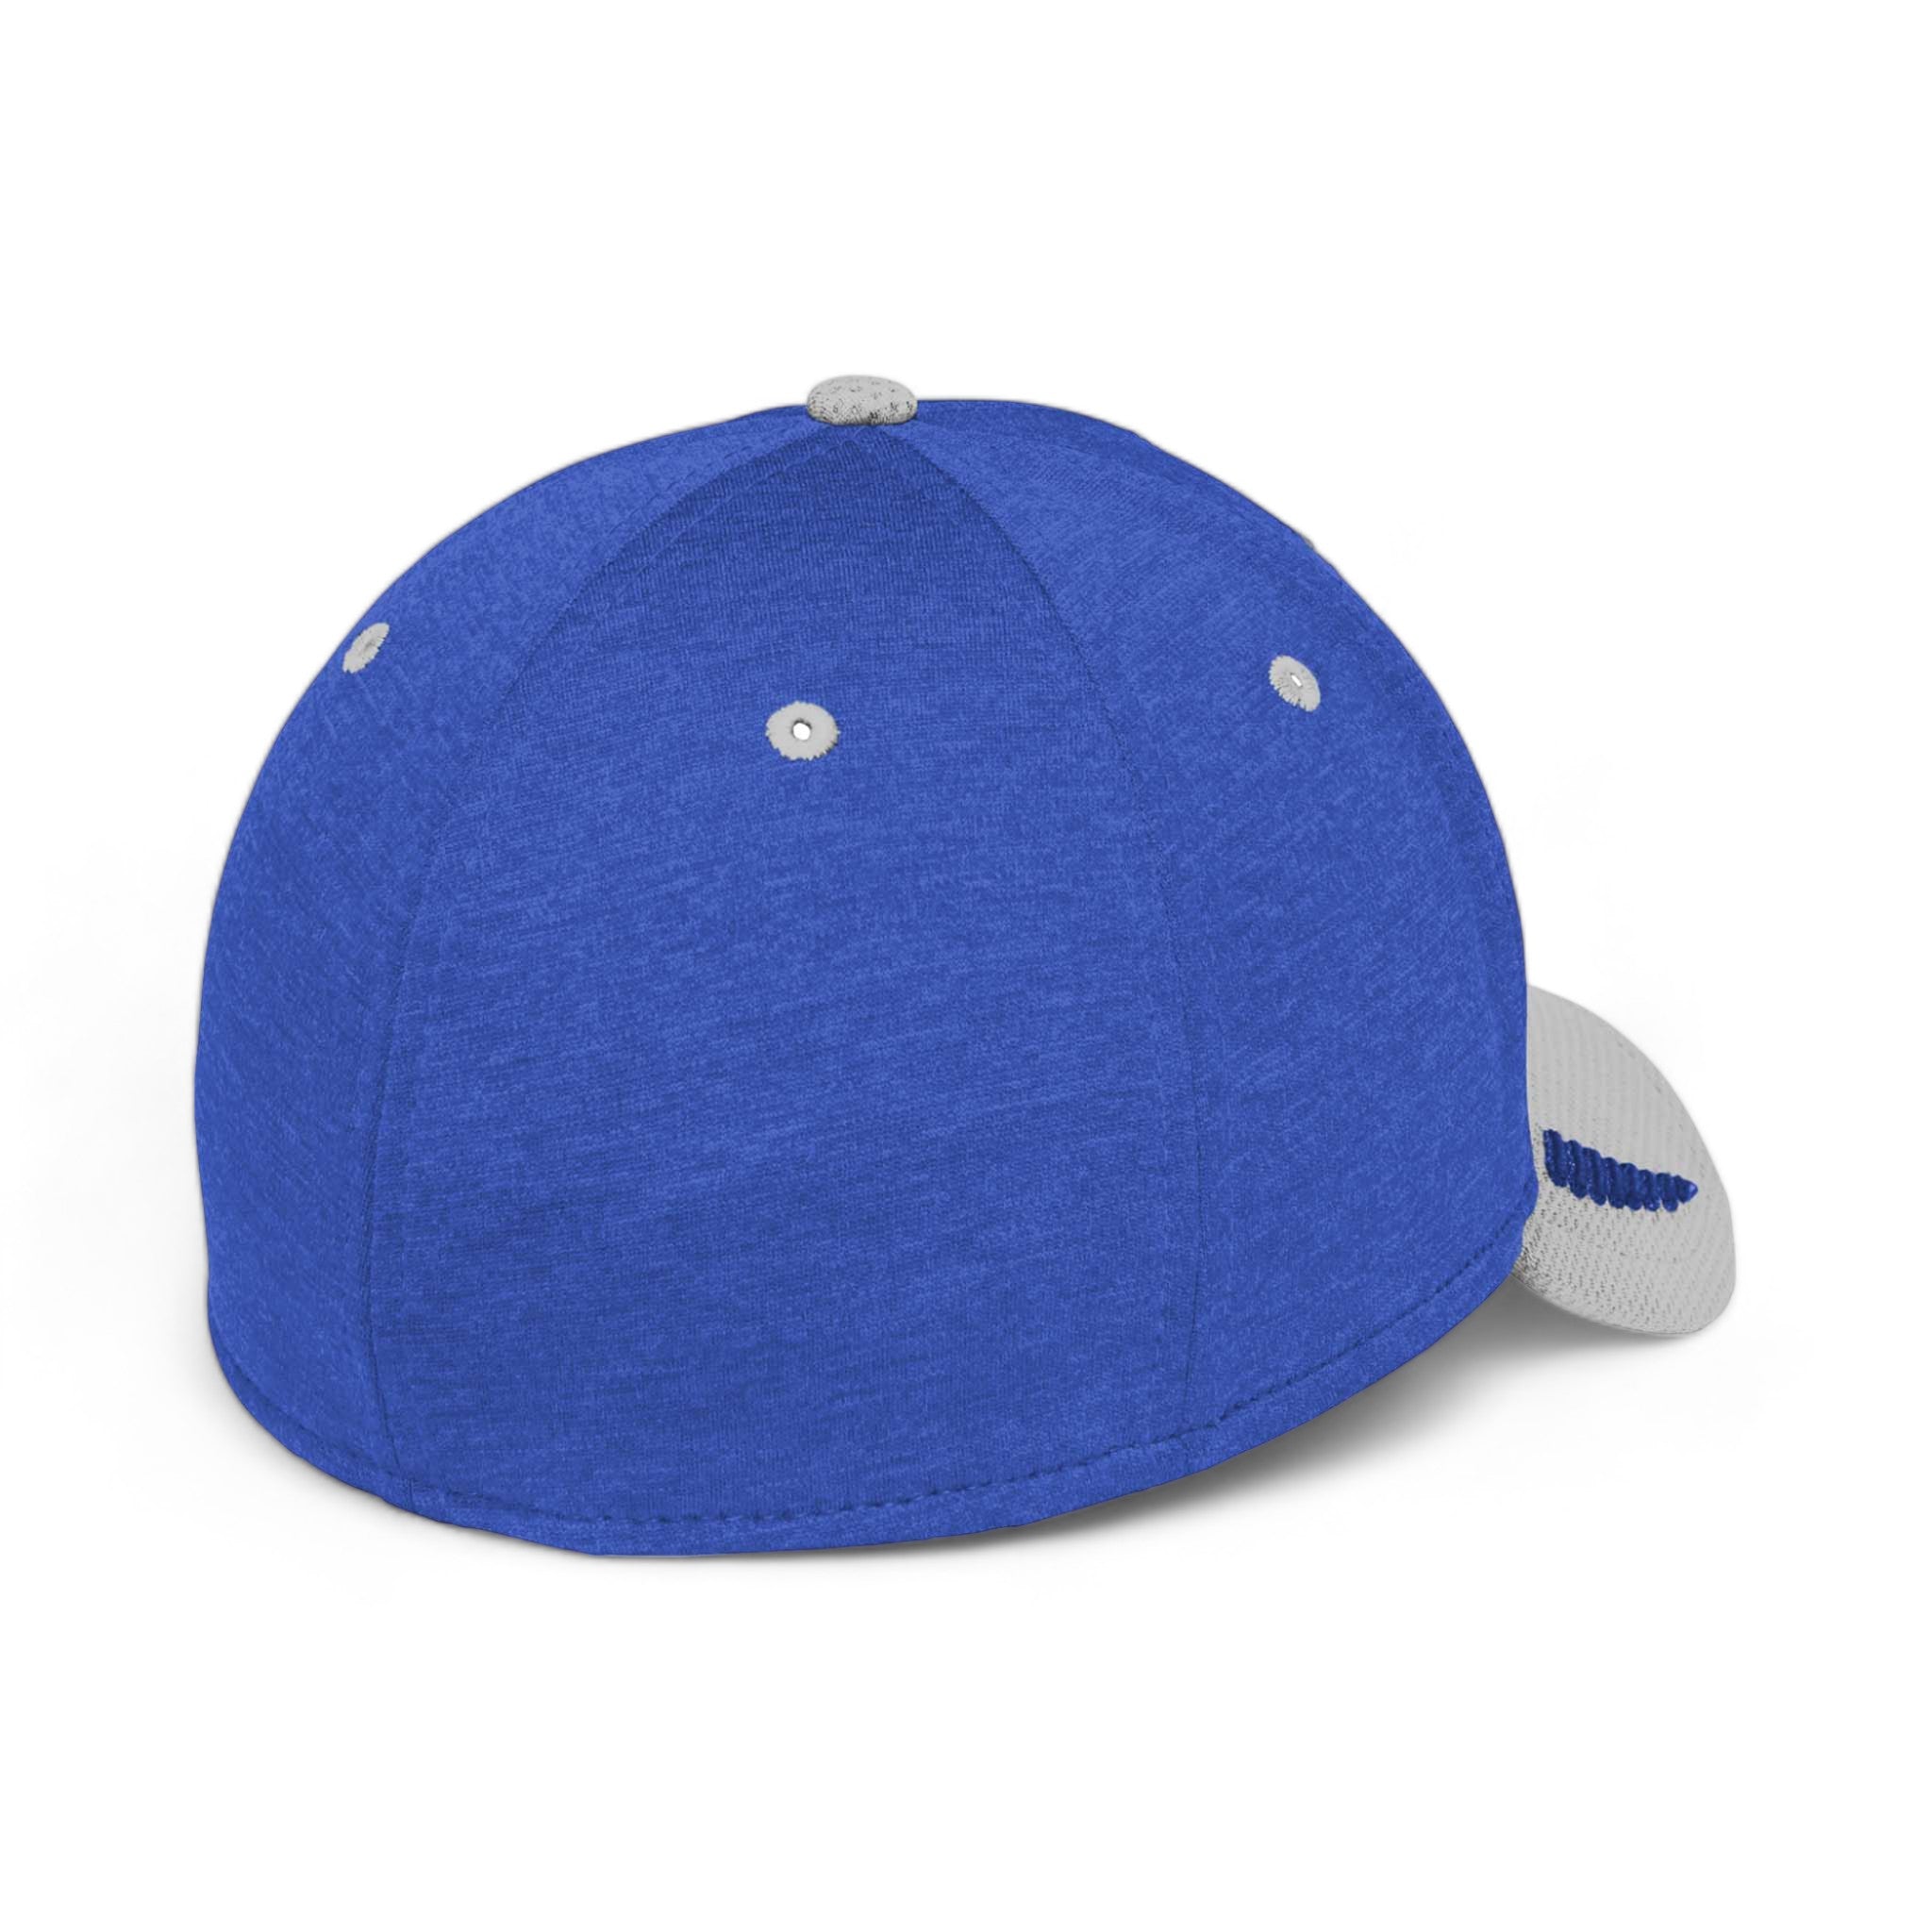 Back view of New Era NE704 custom hat in grey and royal shadow heather